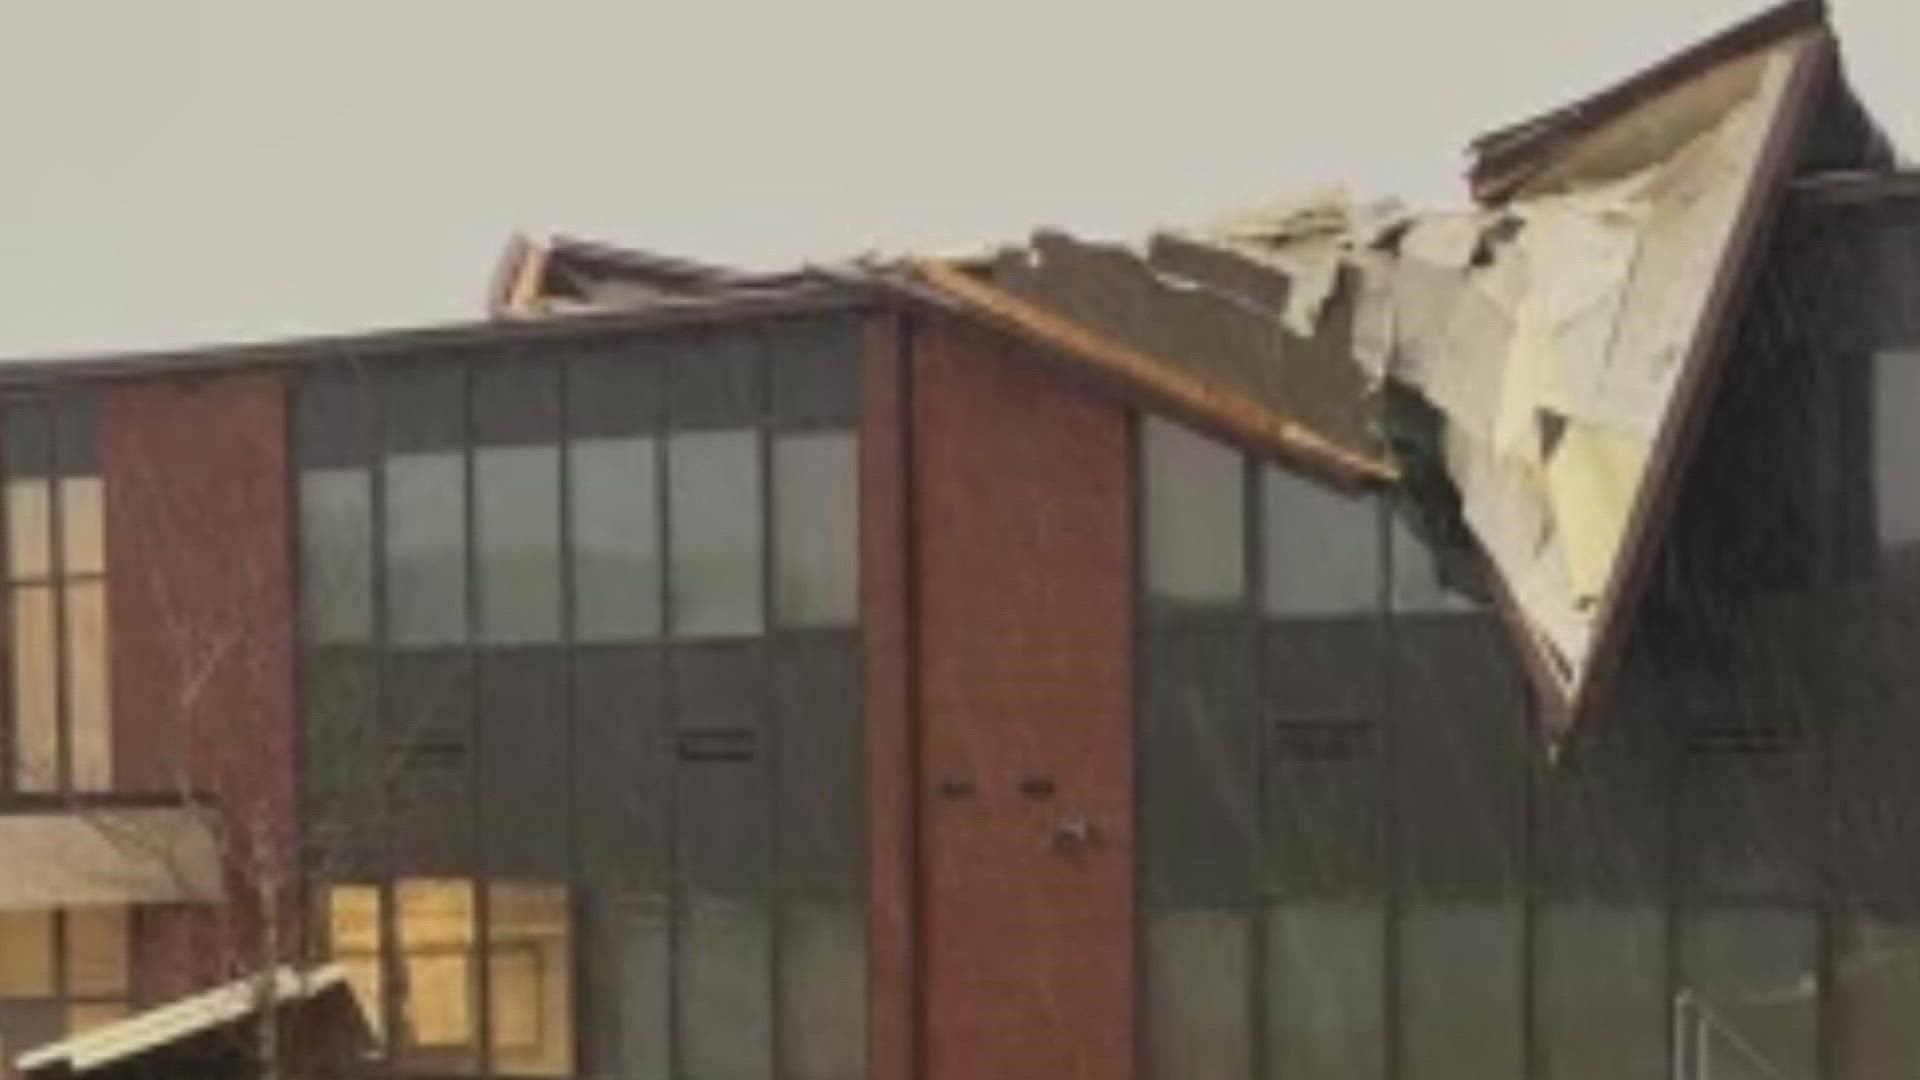 Newport Grammar School is cleaning up after last week's storms on Thursday. The wind blew off the school's rooftop leaving several students with minor scrapes.